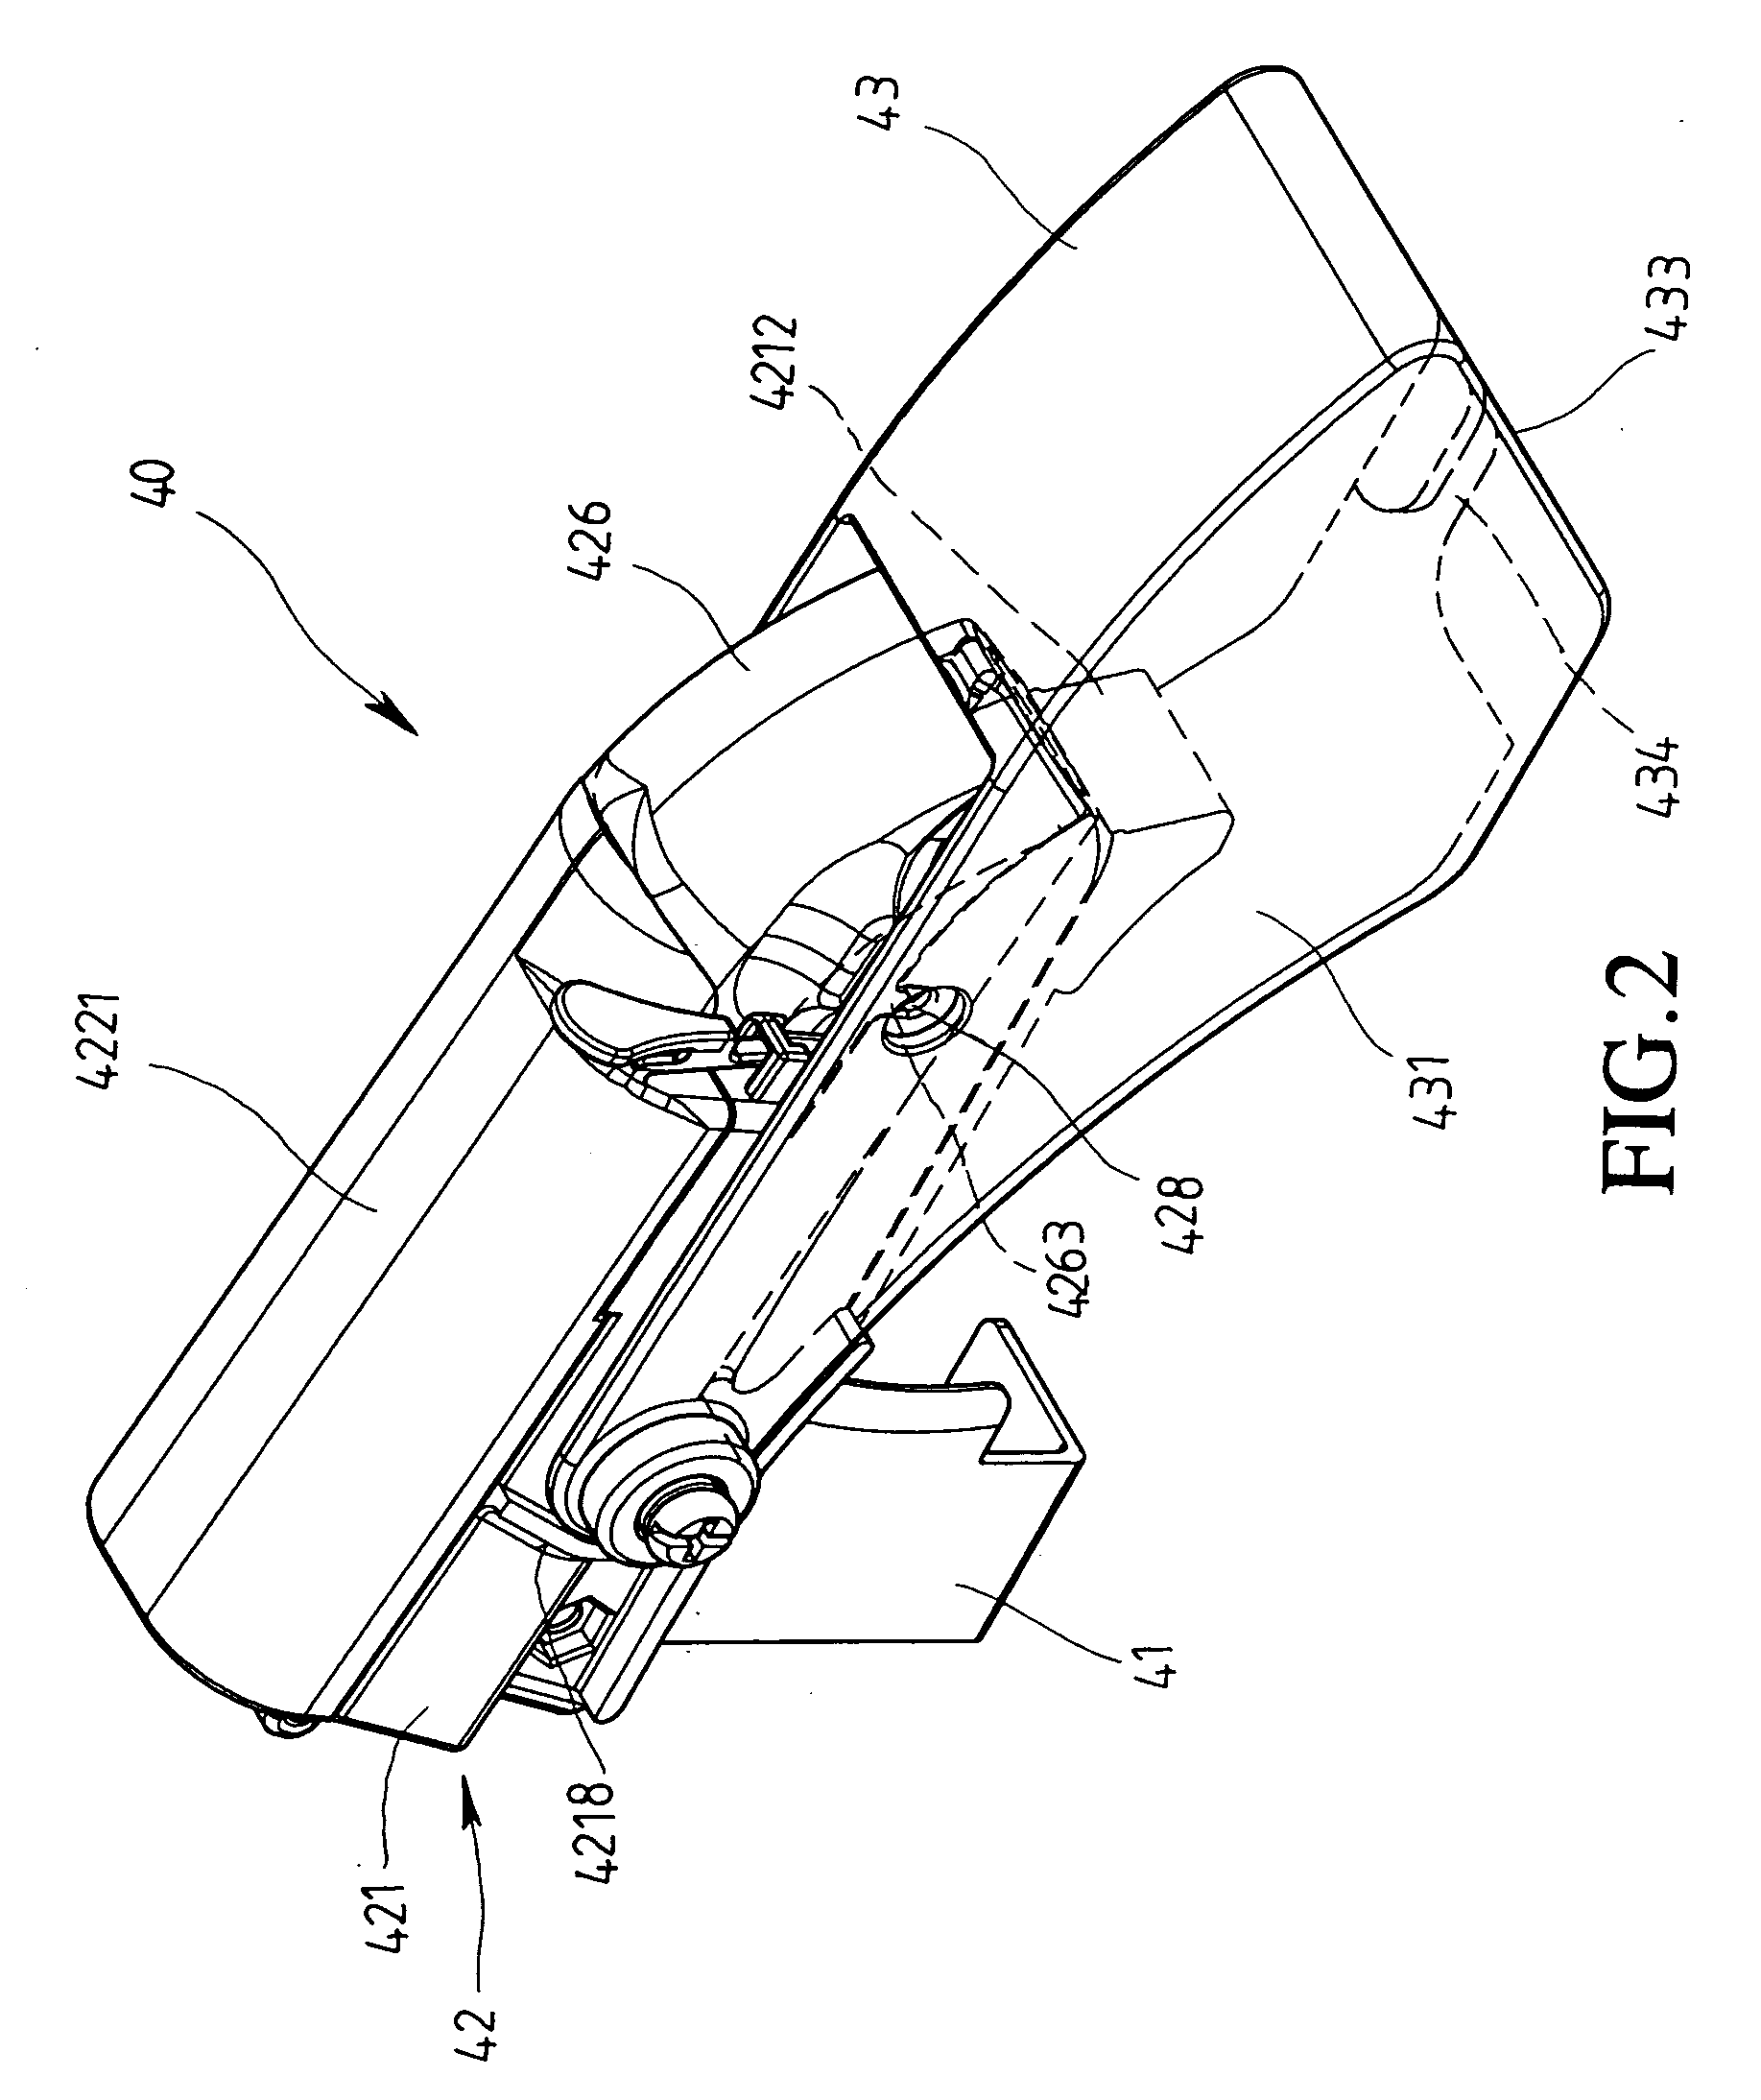 Laser guiding device for tile cutting machine